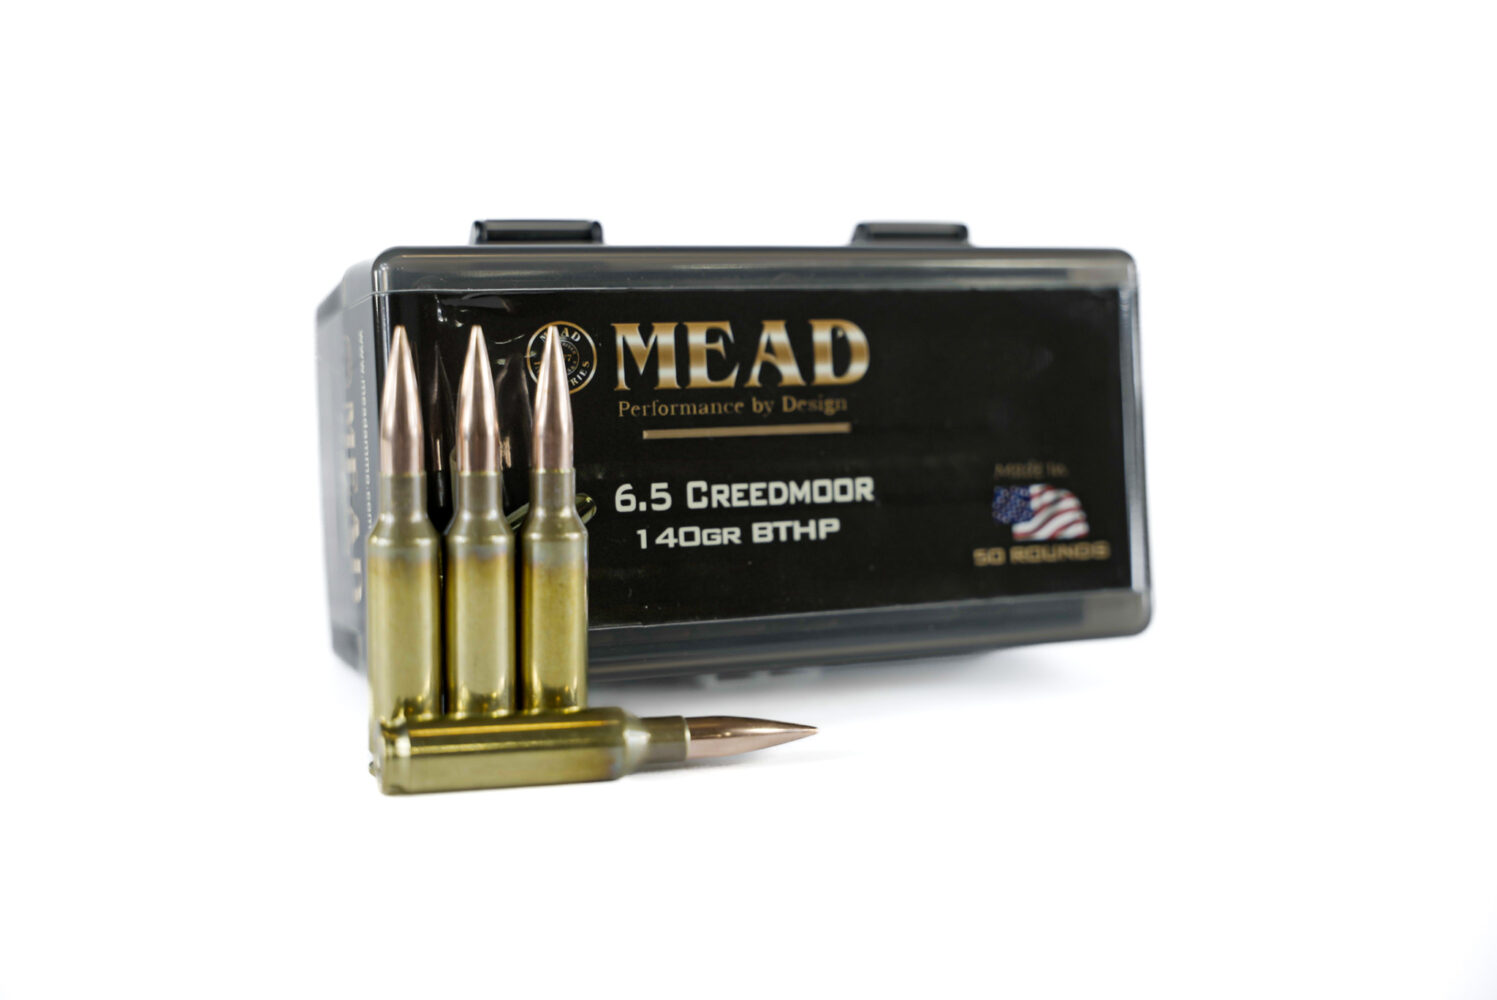 Mead 65 Creedmoor Match 140gr Bthp 50 Rounds Free Ammo Box Mead Industries Inc 